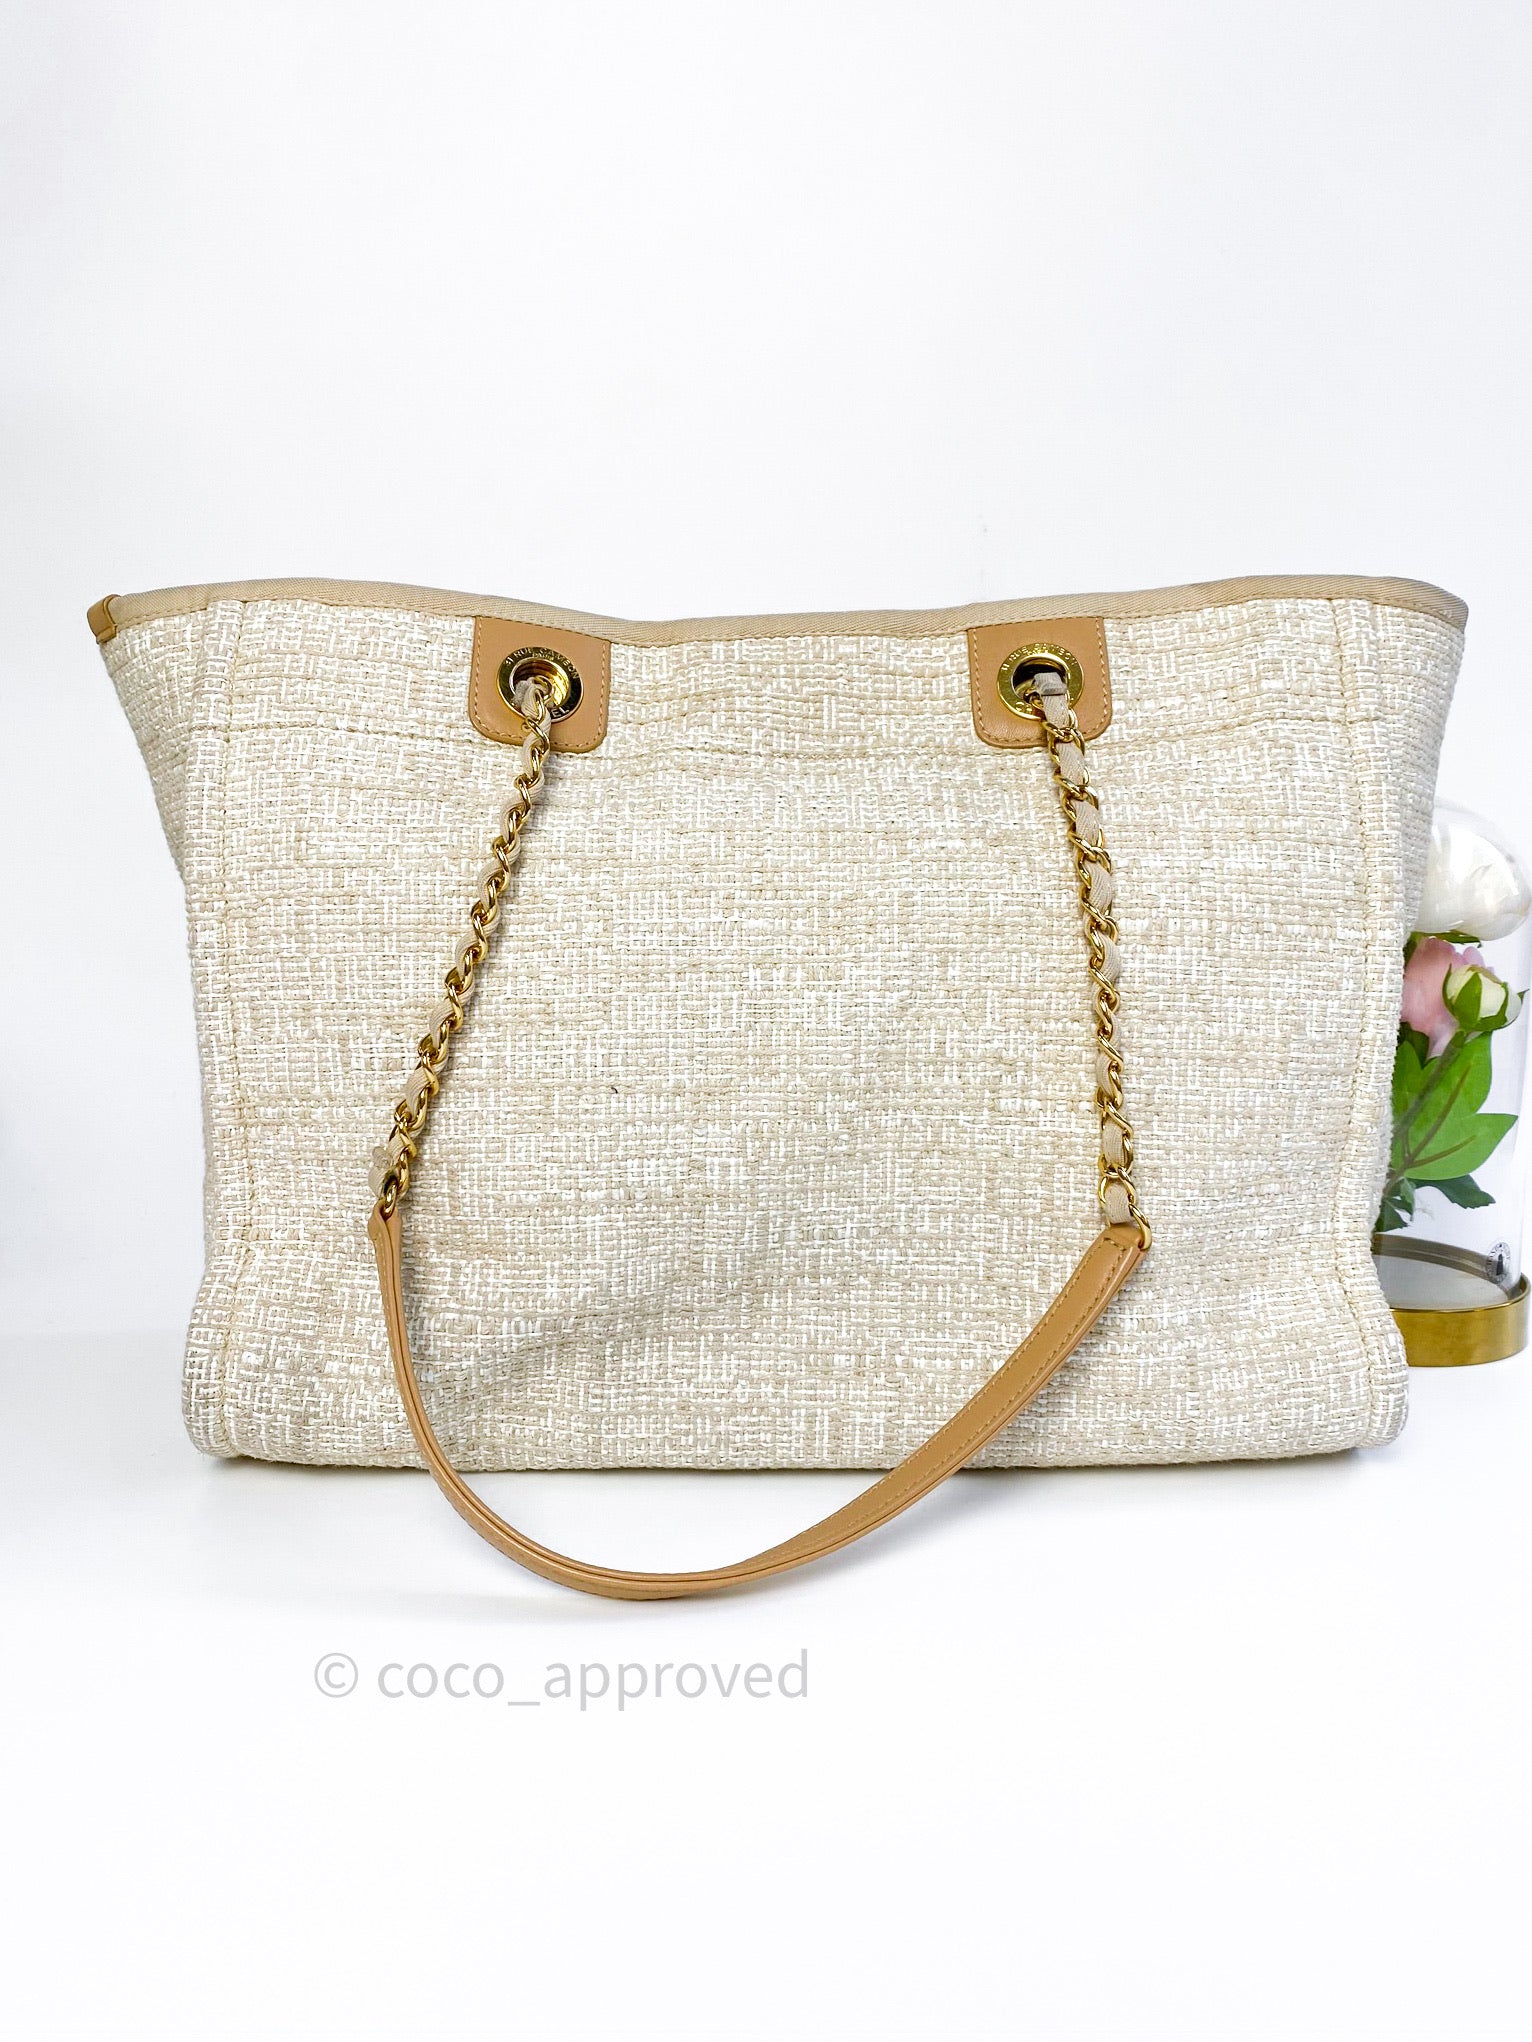 Chanel Beige Canvas and Leather Large Deauville Shopper Tote